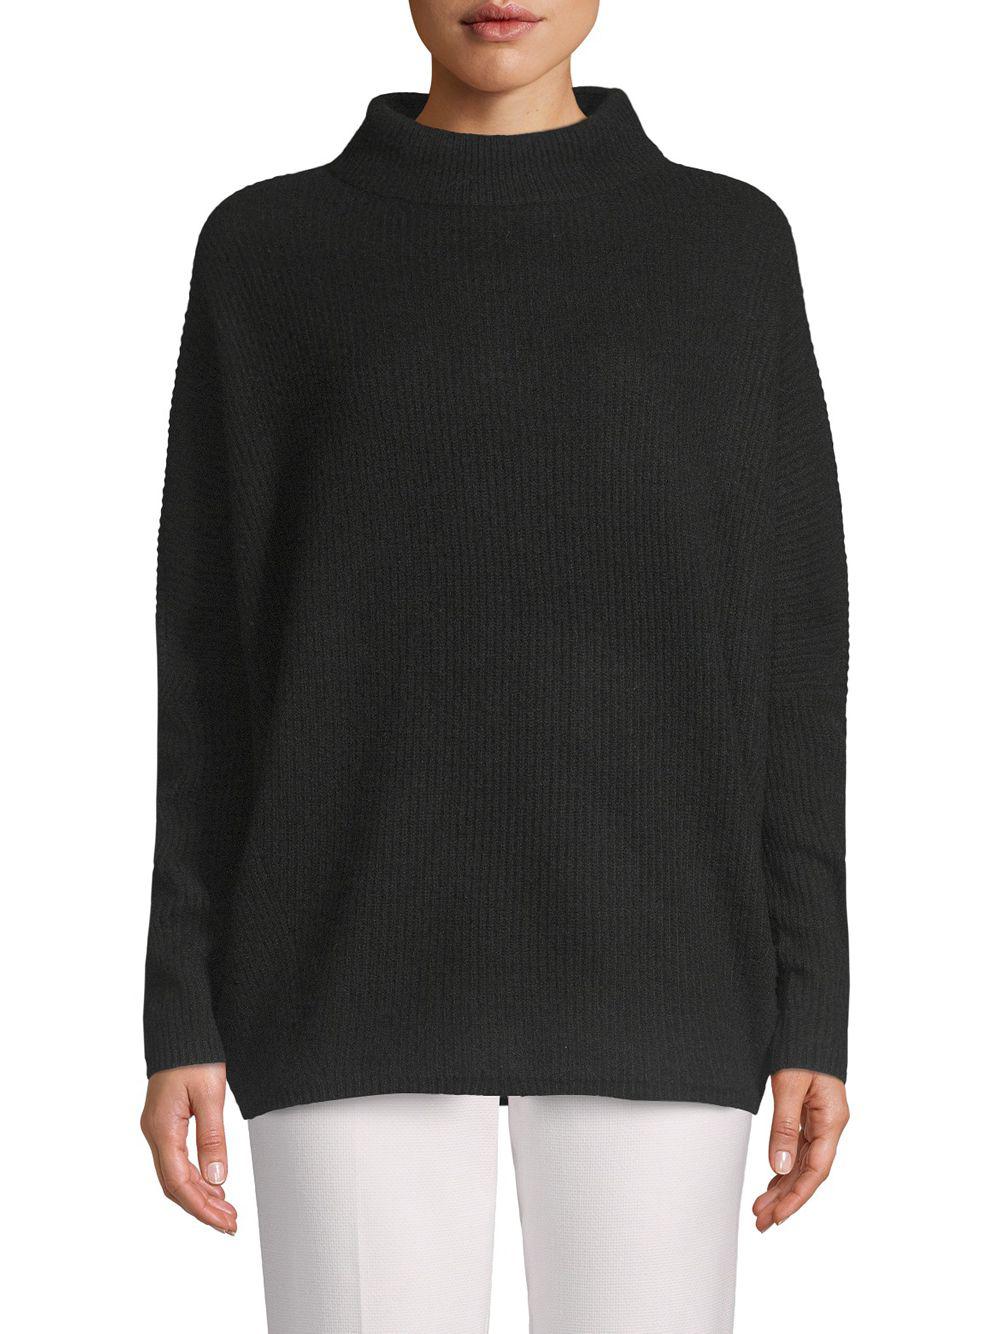 Saks Fifth Avenue Classic Cashmere Sweater in Black - Lyst